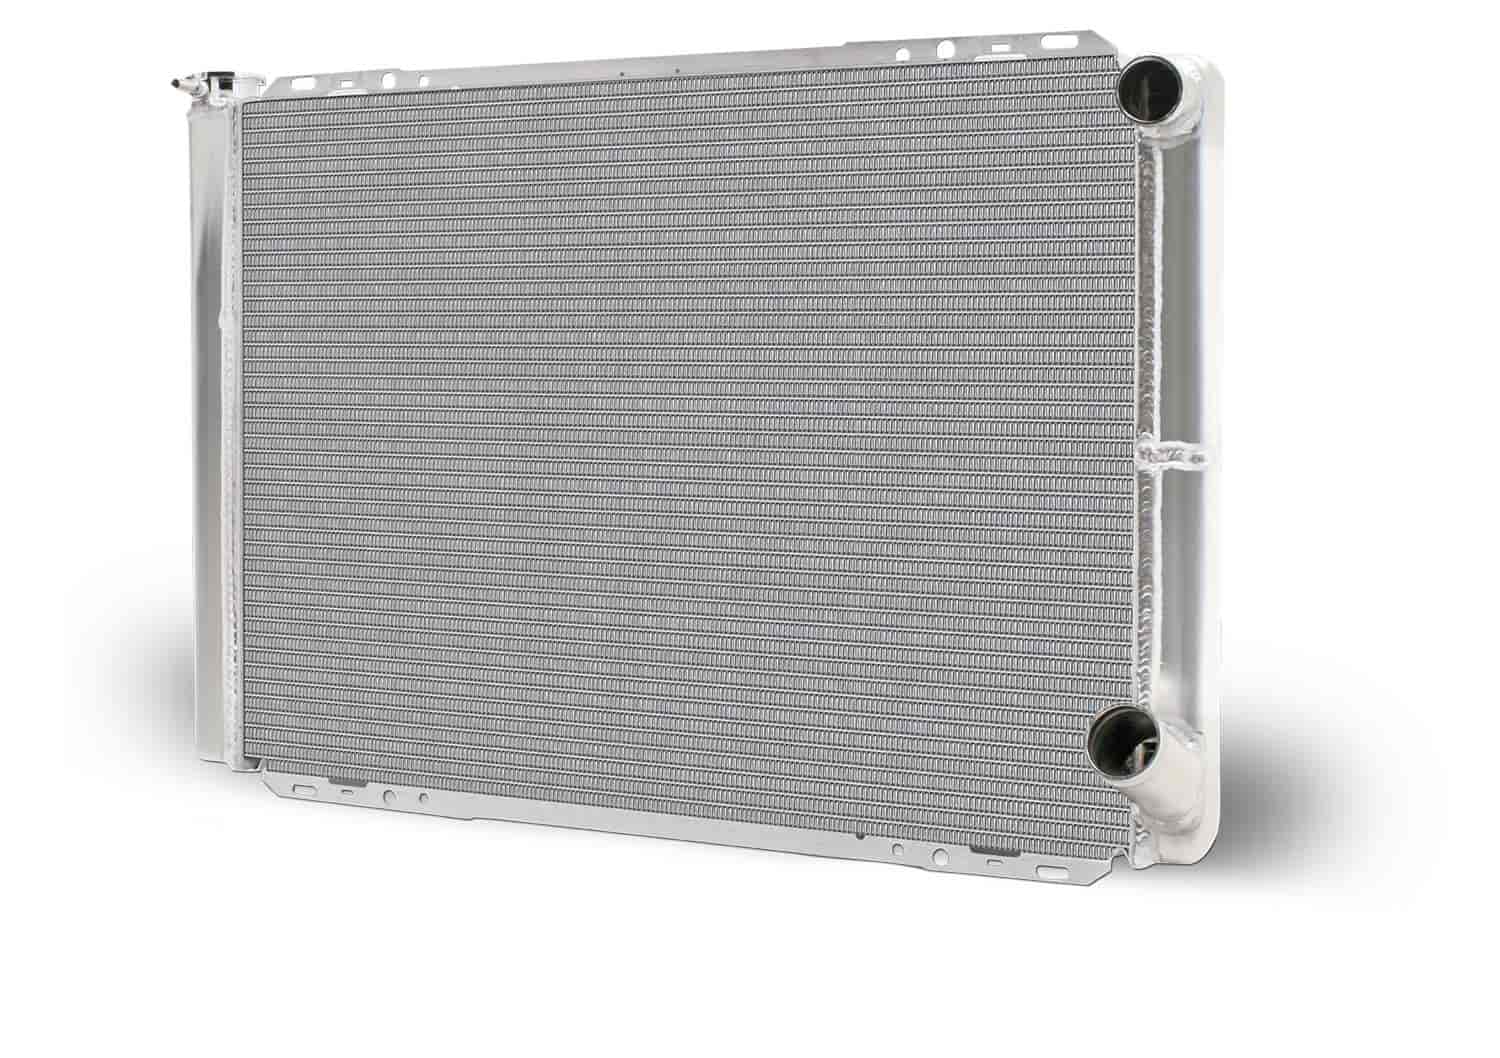 AFCO RADIATOR 28IN CHEVY